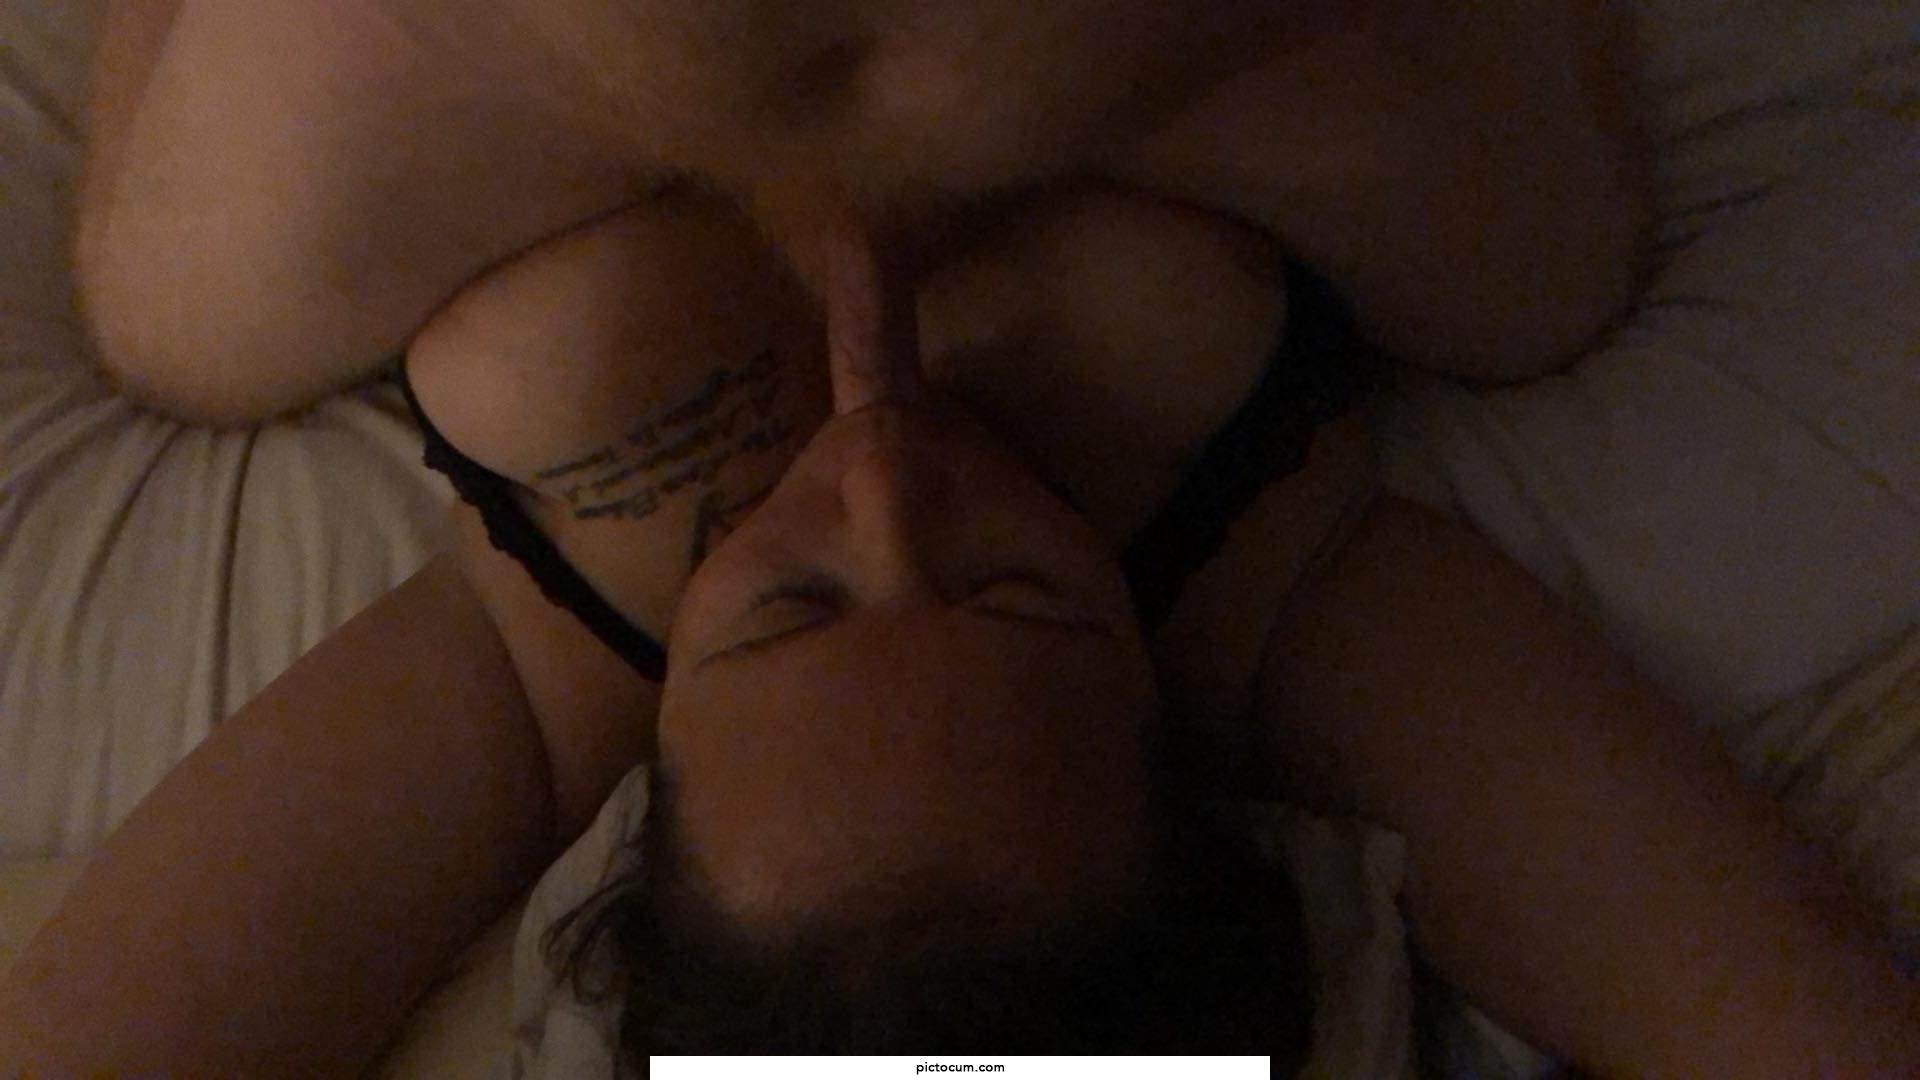 Who else wants to fuck my mouth like this??